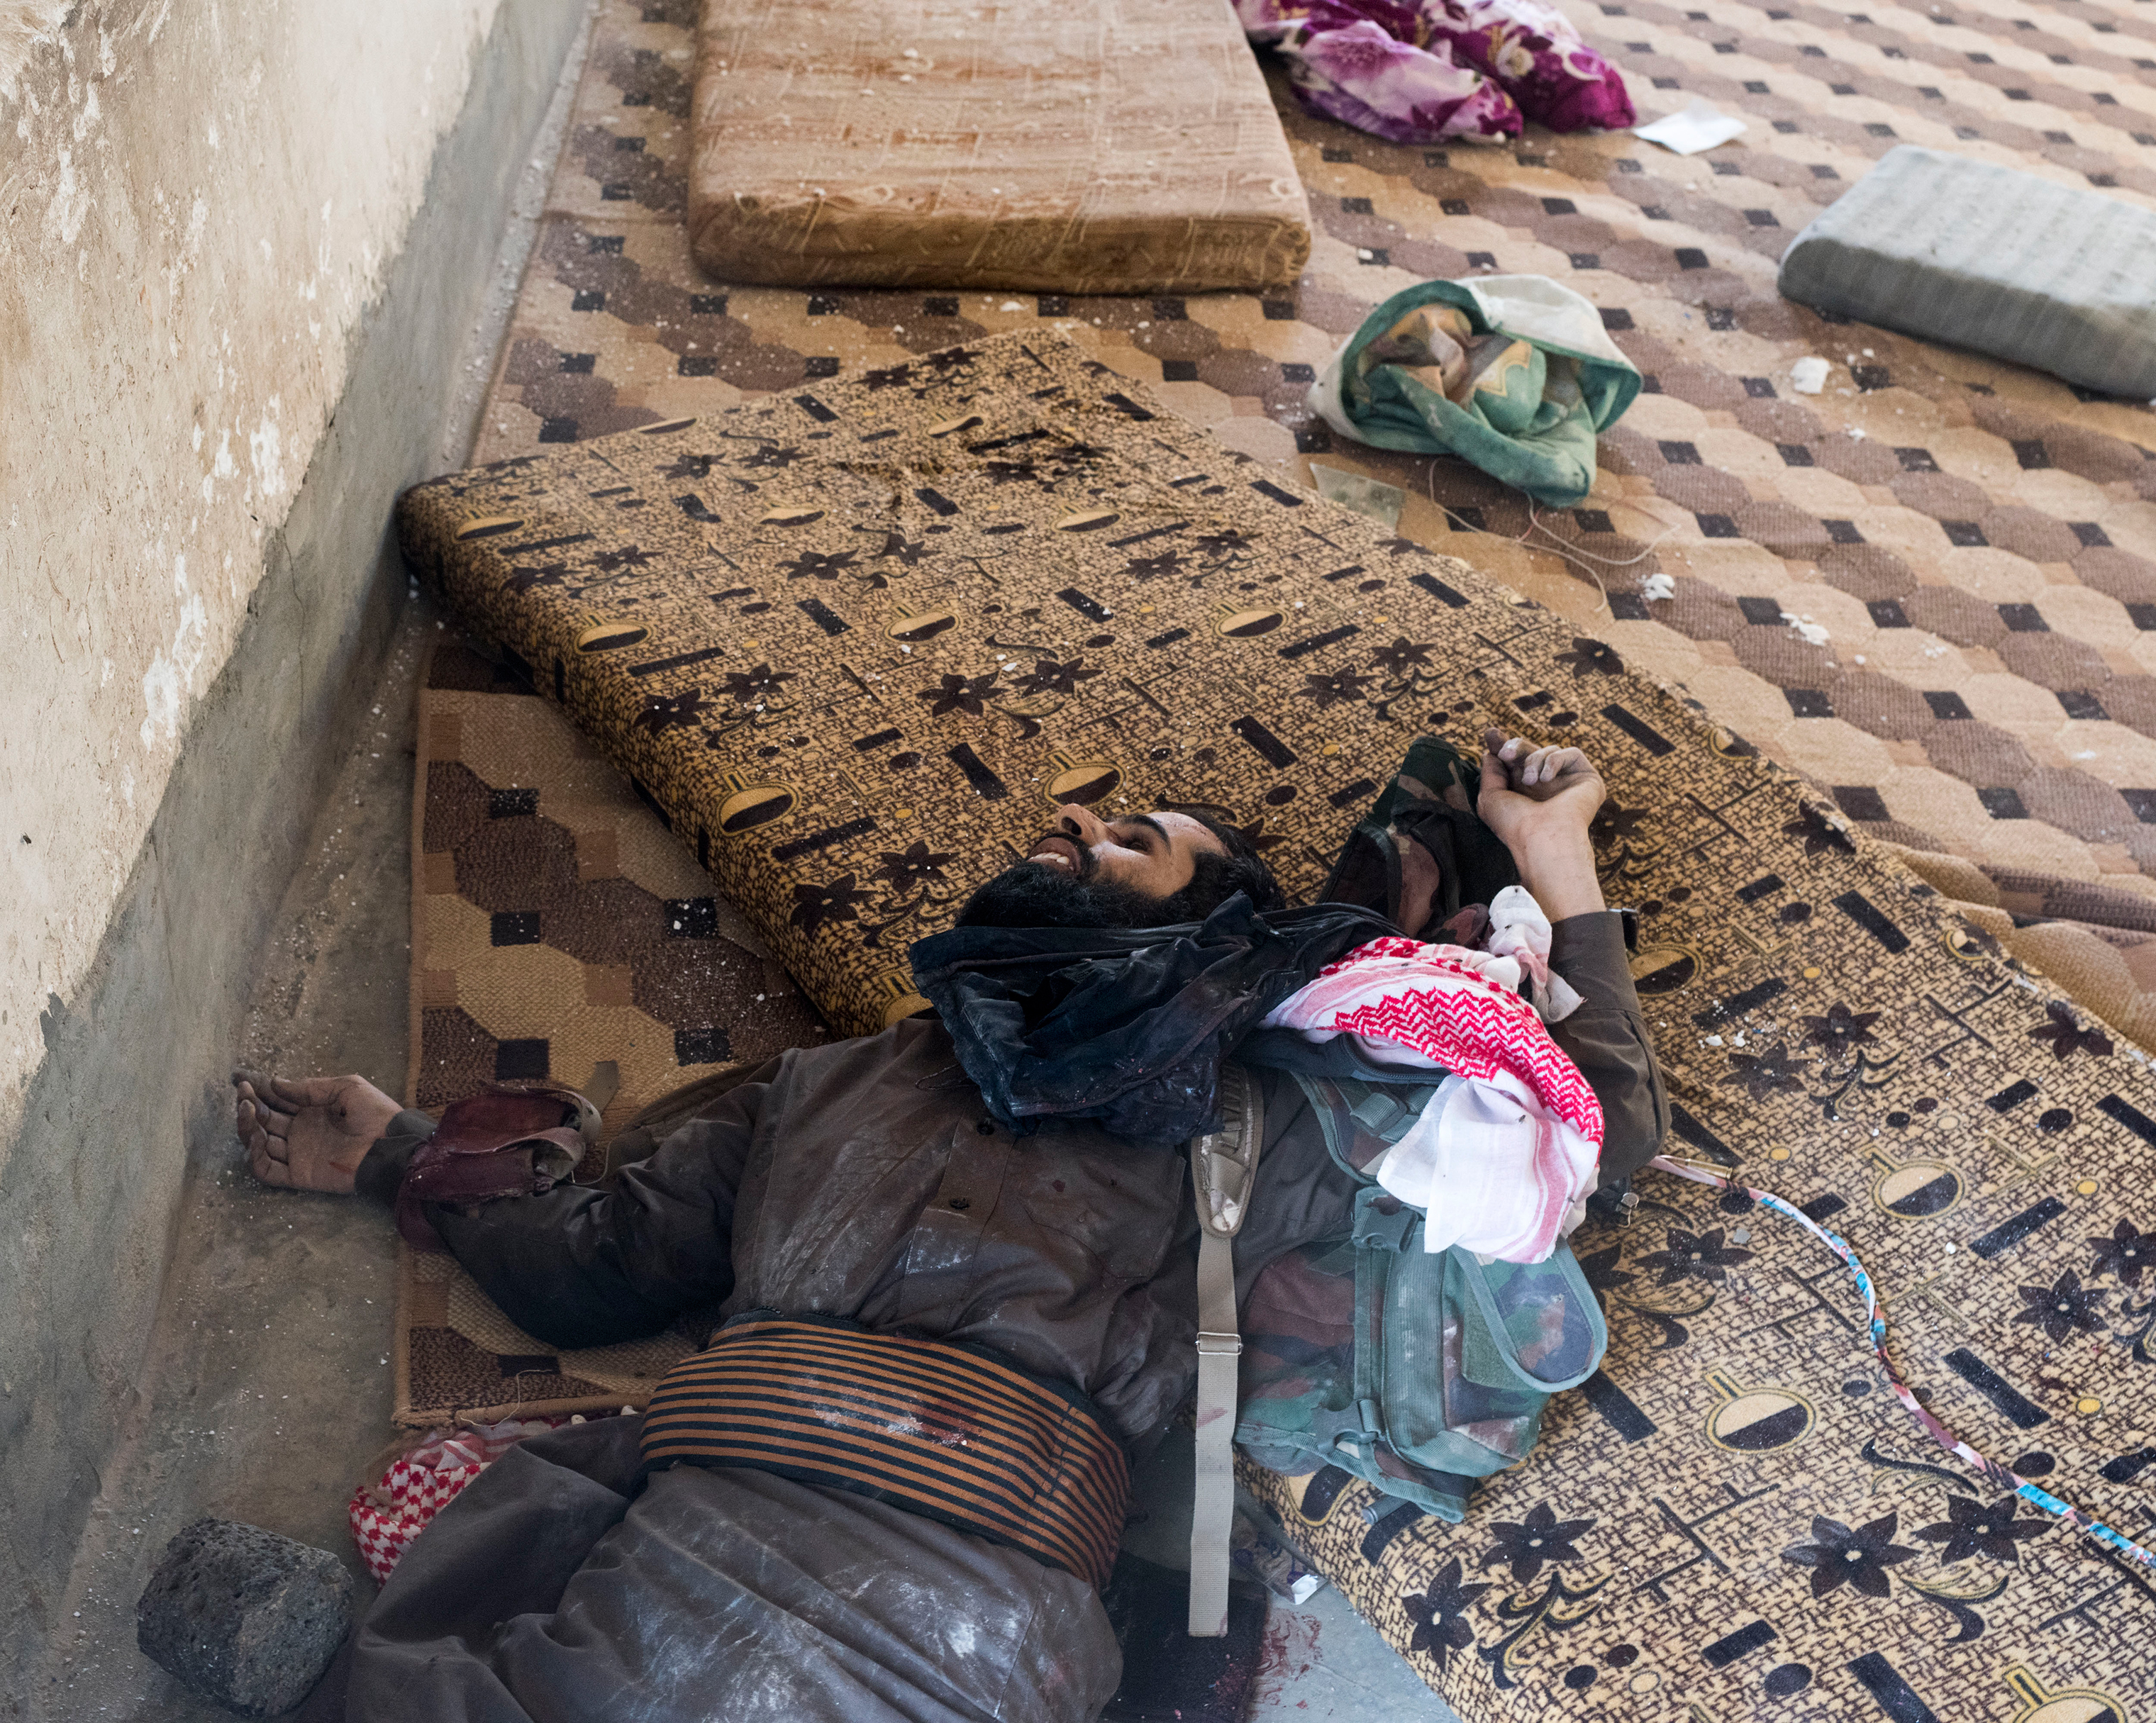 The body of an ISIS fighter killed during fighting with a Kurdish militia on the outskirts of Deir ez-Zor in October. He is still wearing a suicide belt. (Lorenzo Meloni—Magnum Photos)